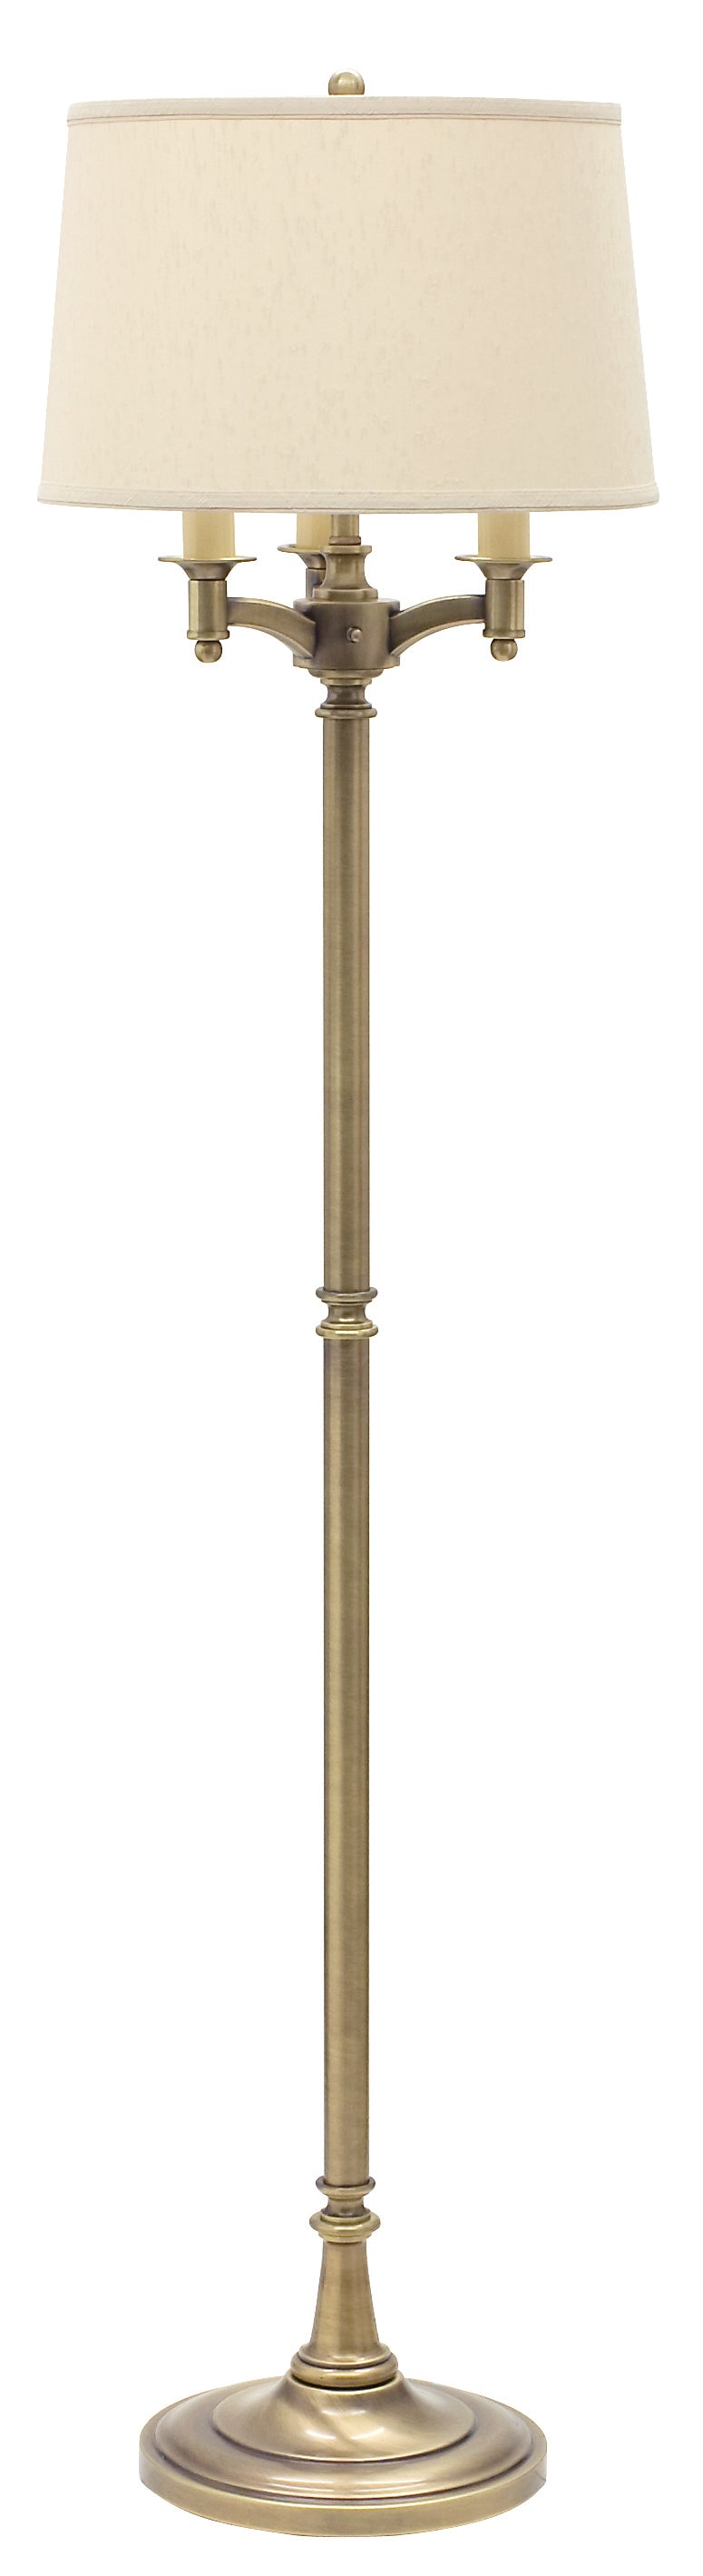 House of Troy Lancaster 62.75" Antique Brass Six Way Floor Lamp L800-AB